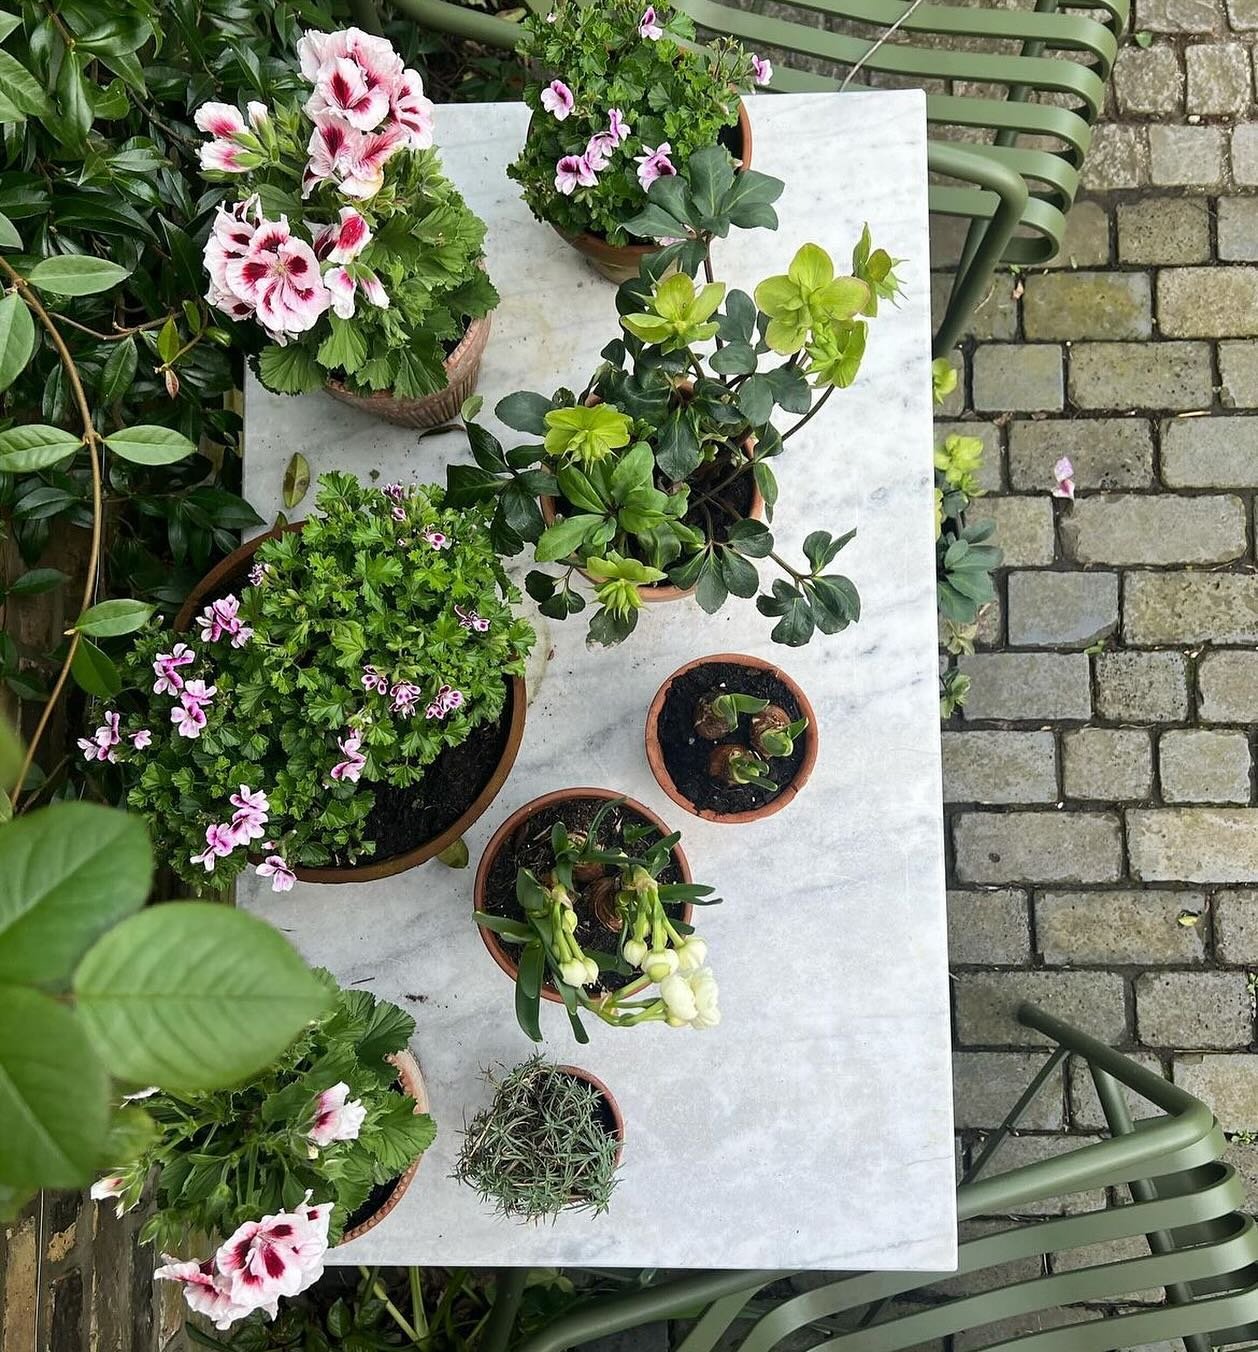 Love this cheery little courtyard display &hellip;. pinks, greens &amp; marble the prettiest combination via @matildagoad with thanks